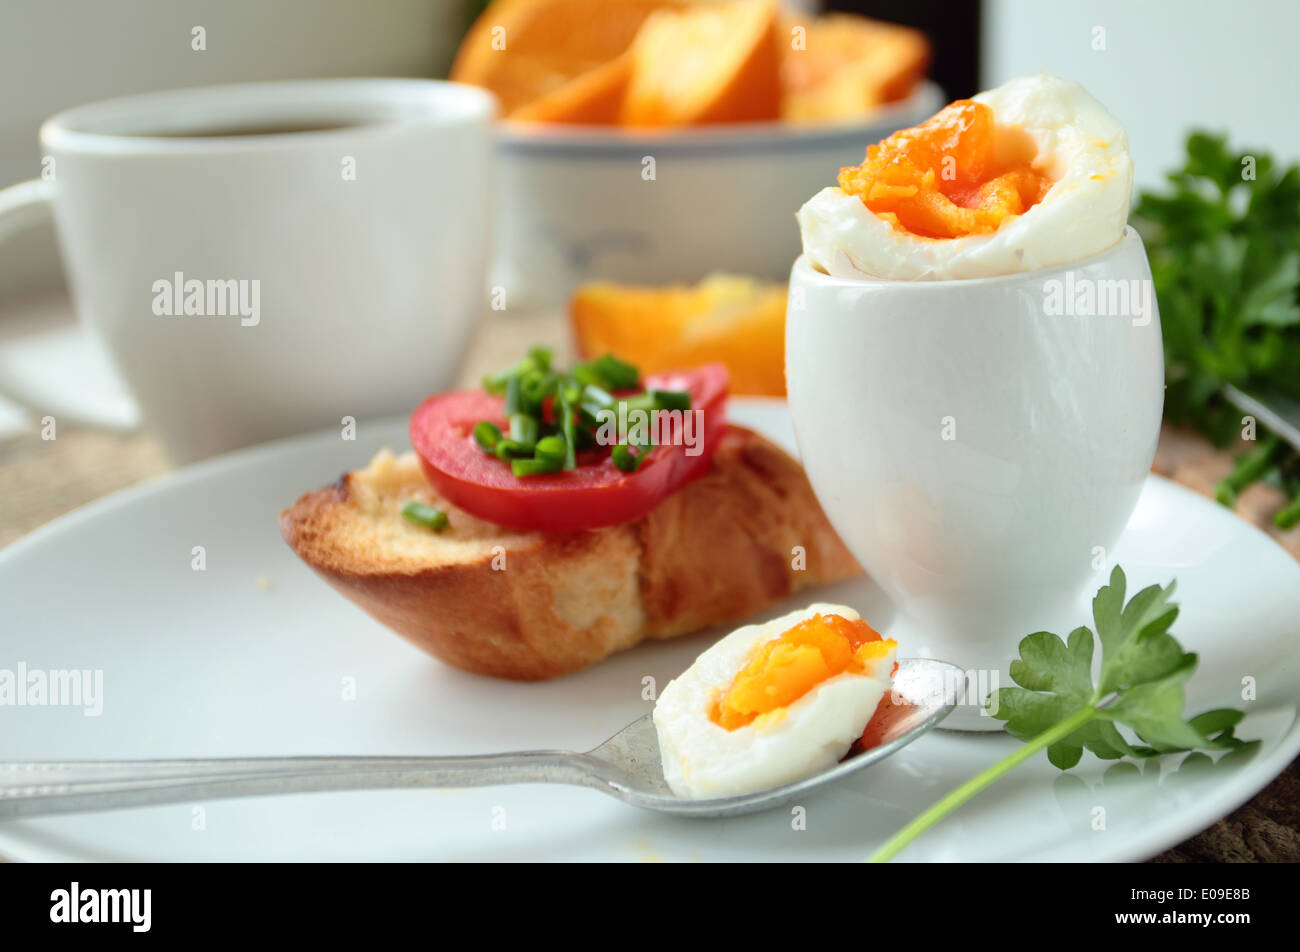 Boiled egg with crunchy bread and fresh vegetables Stock Photo